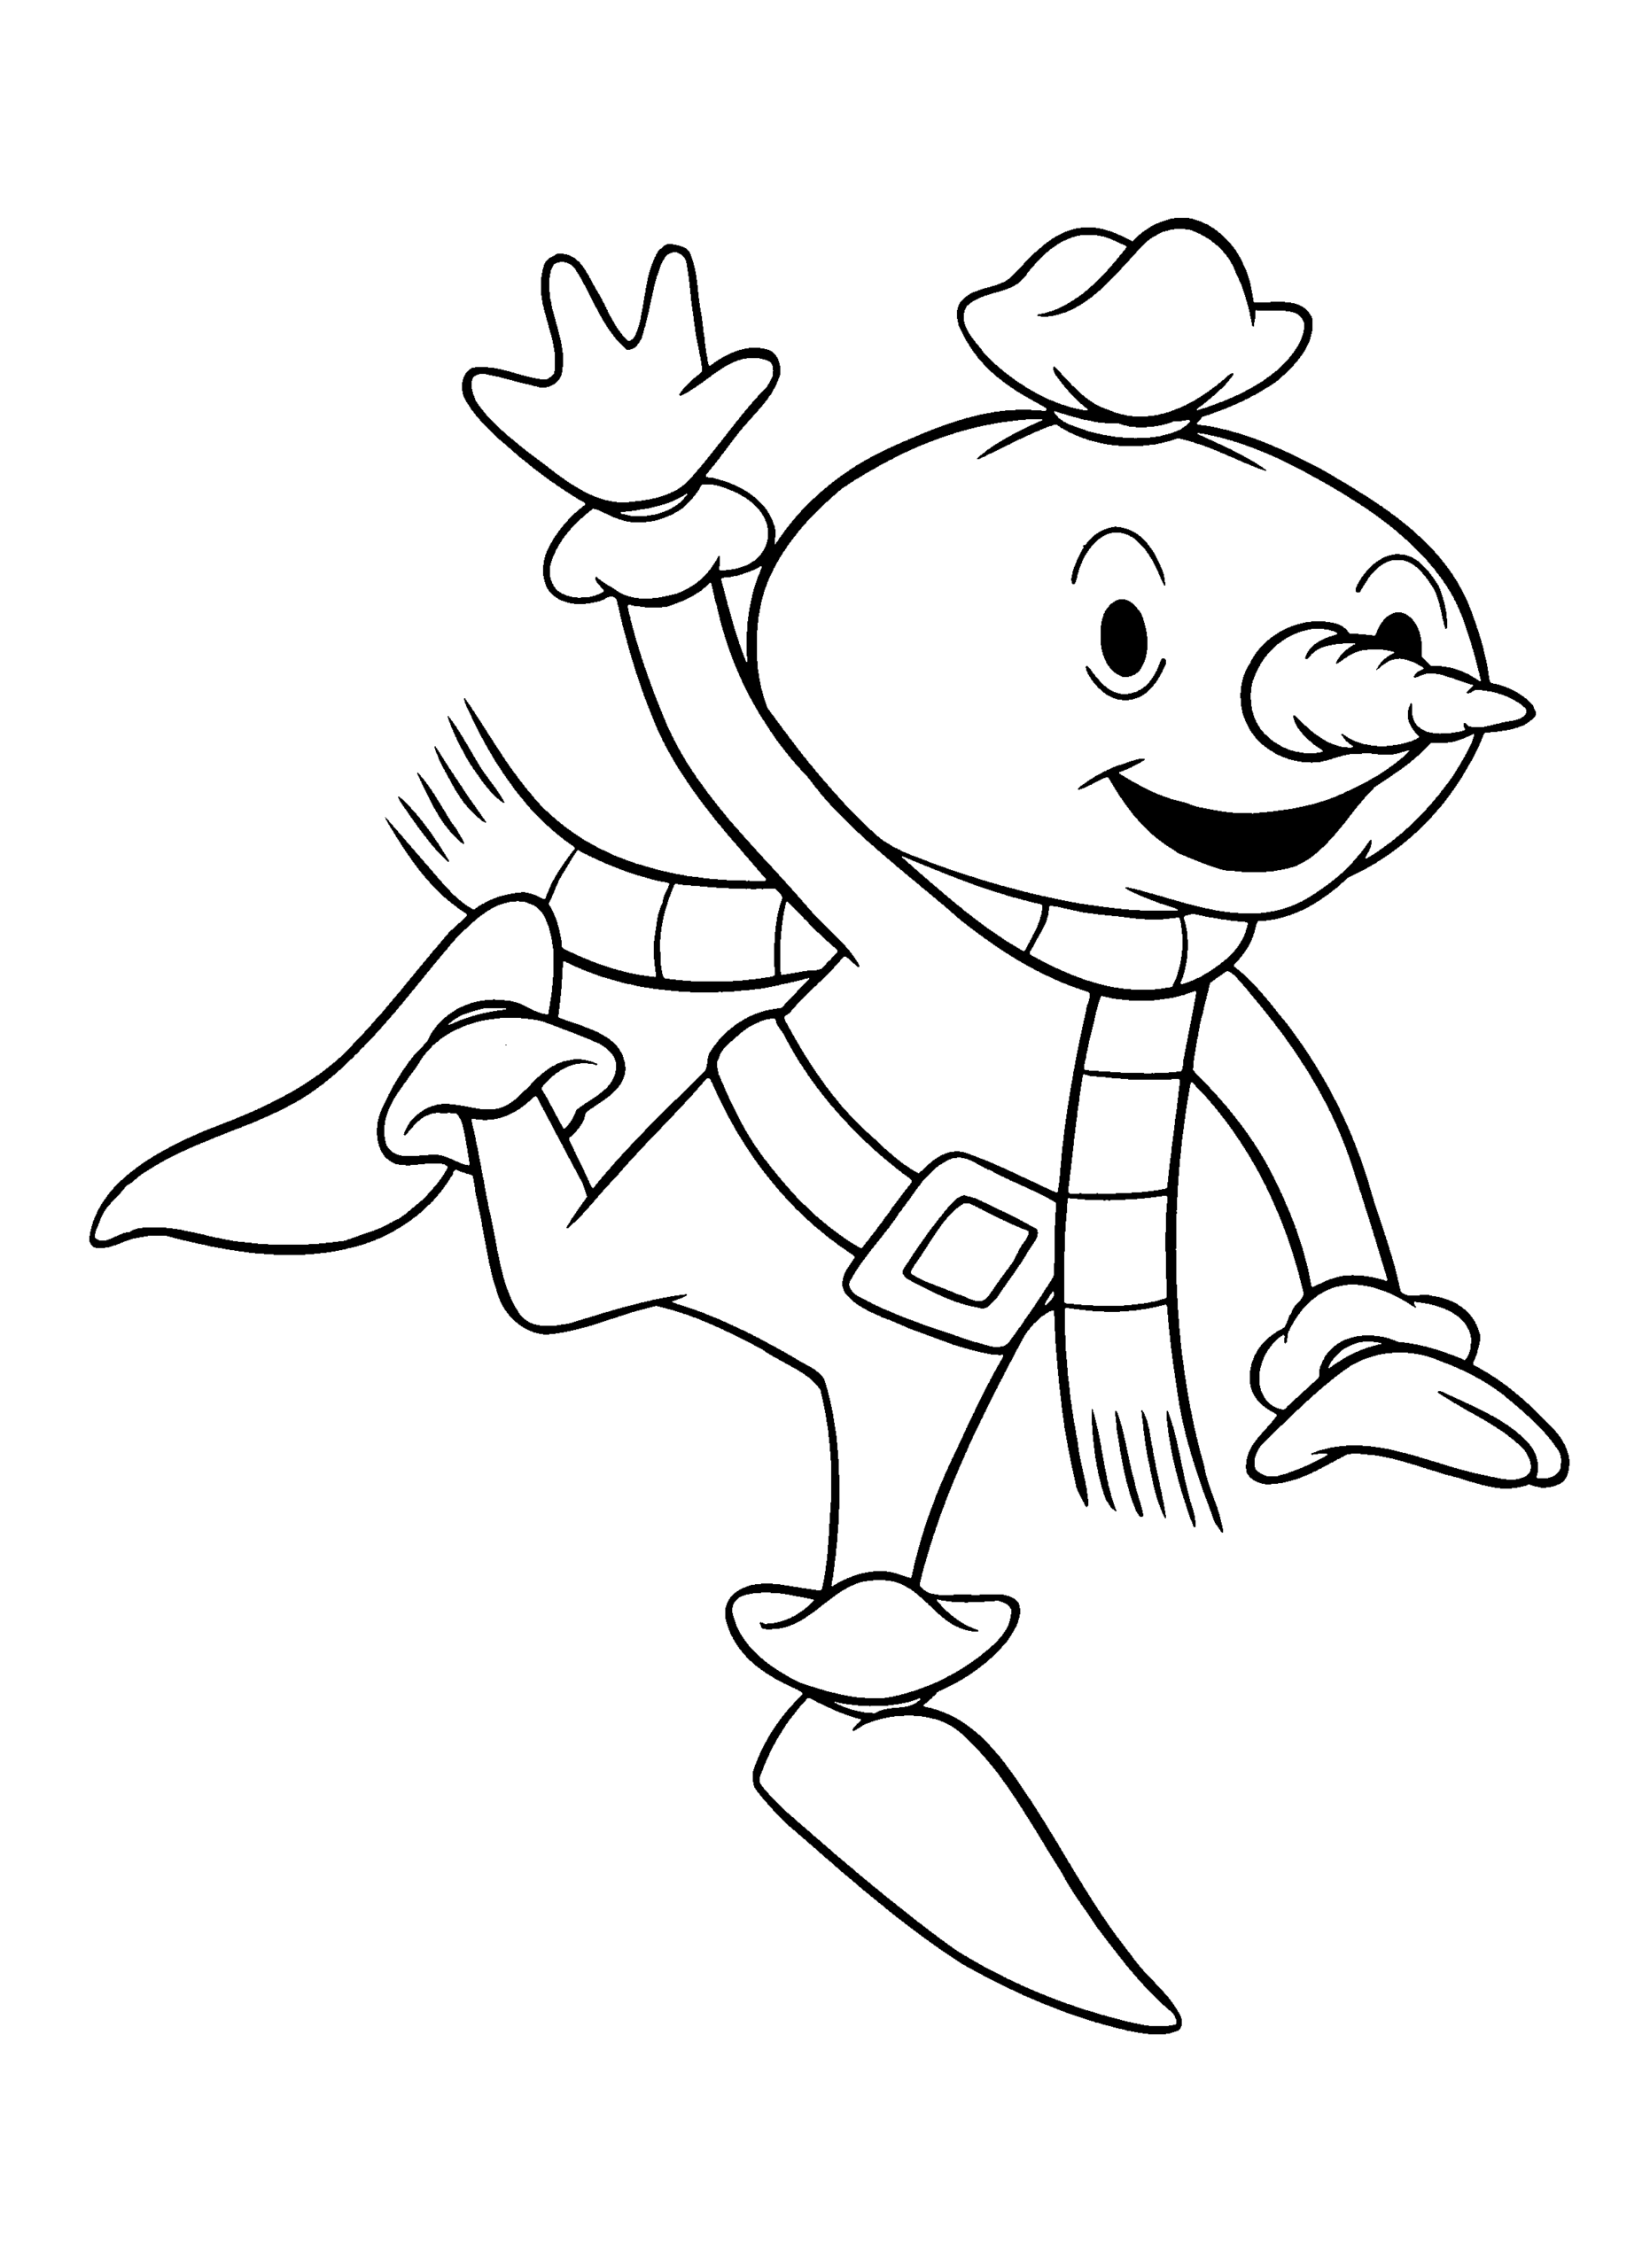 Bob the Builder Coloring Pages TV Film bob der baumeister Printable 2020 00937 Coloring4free